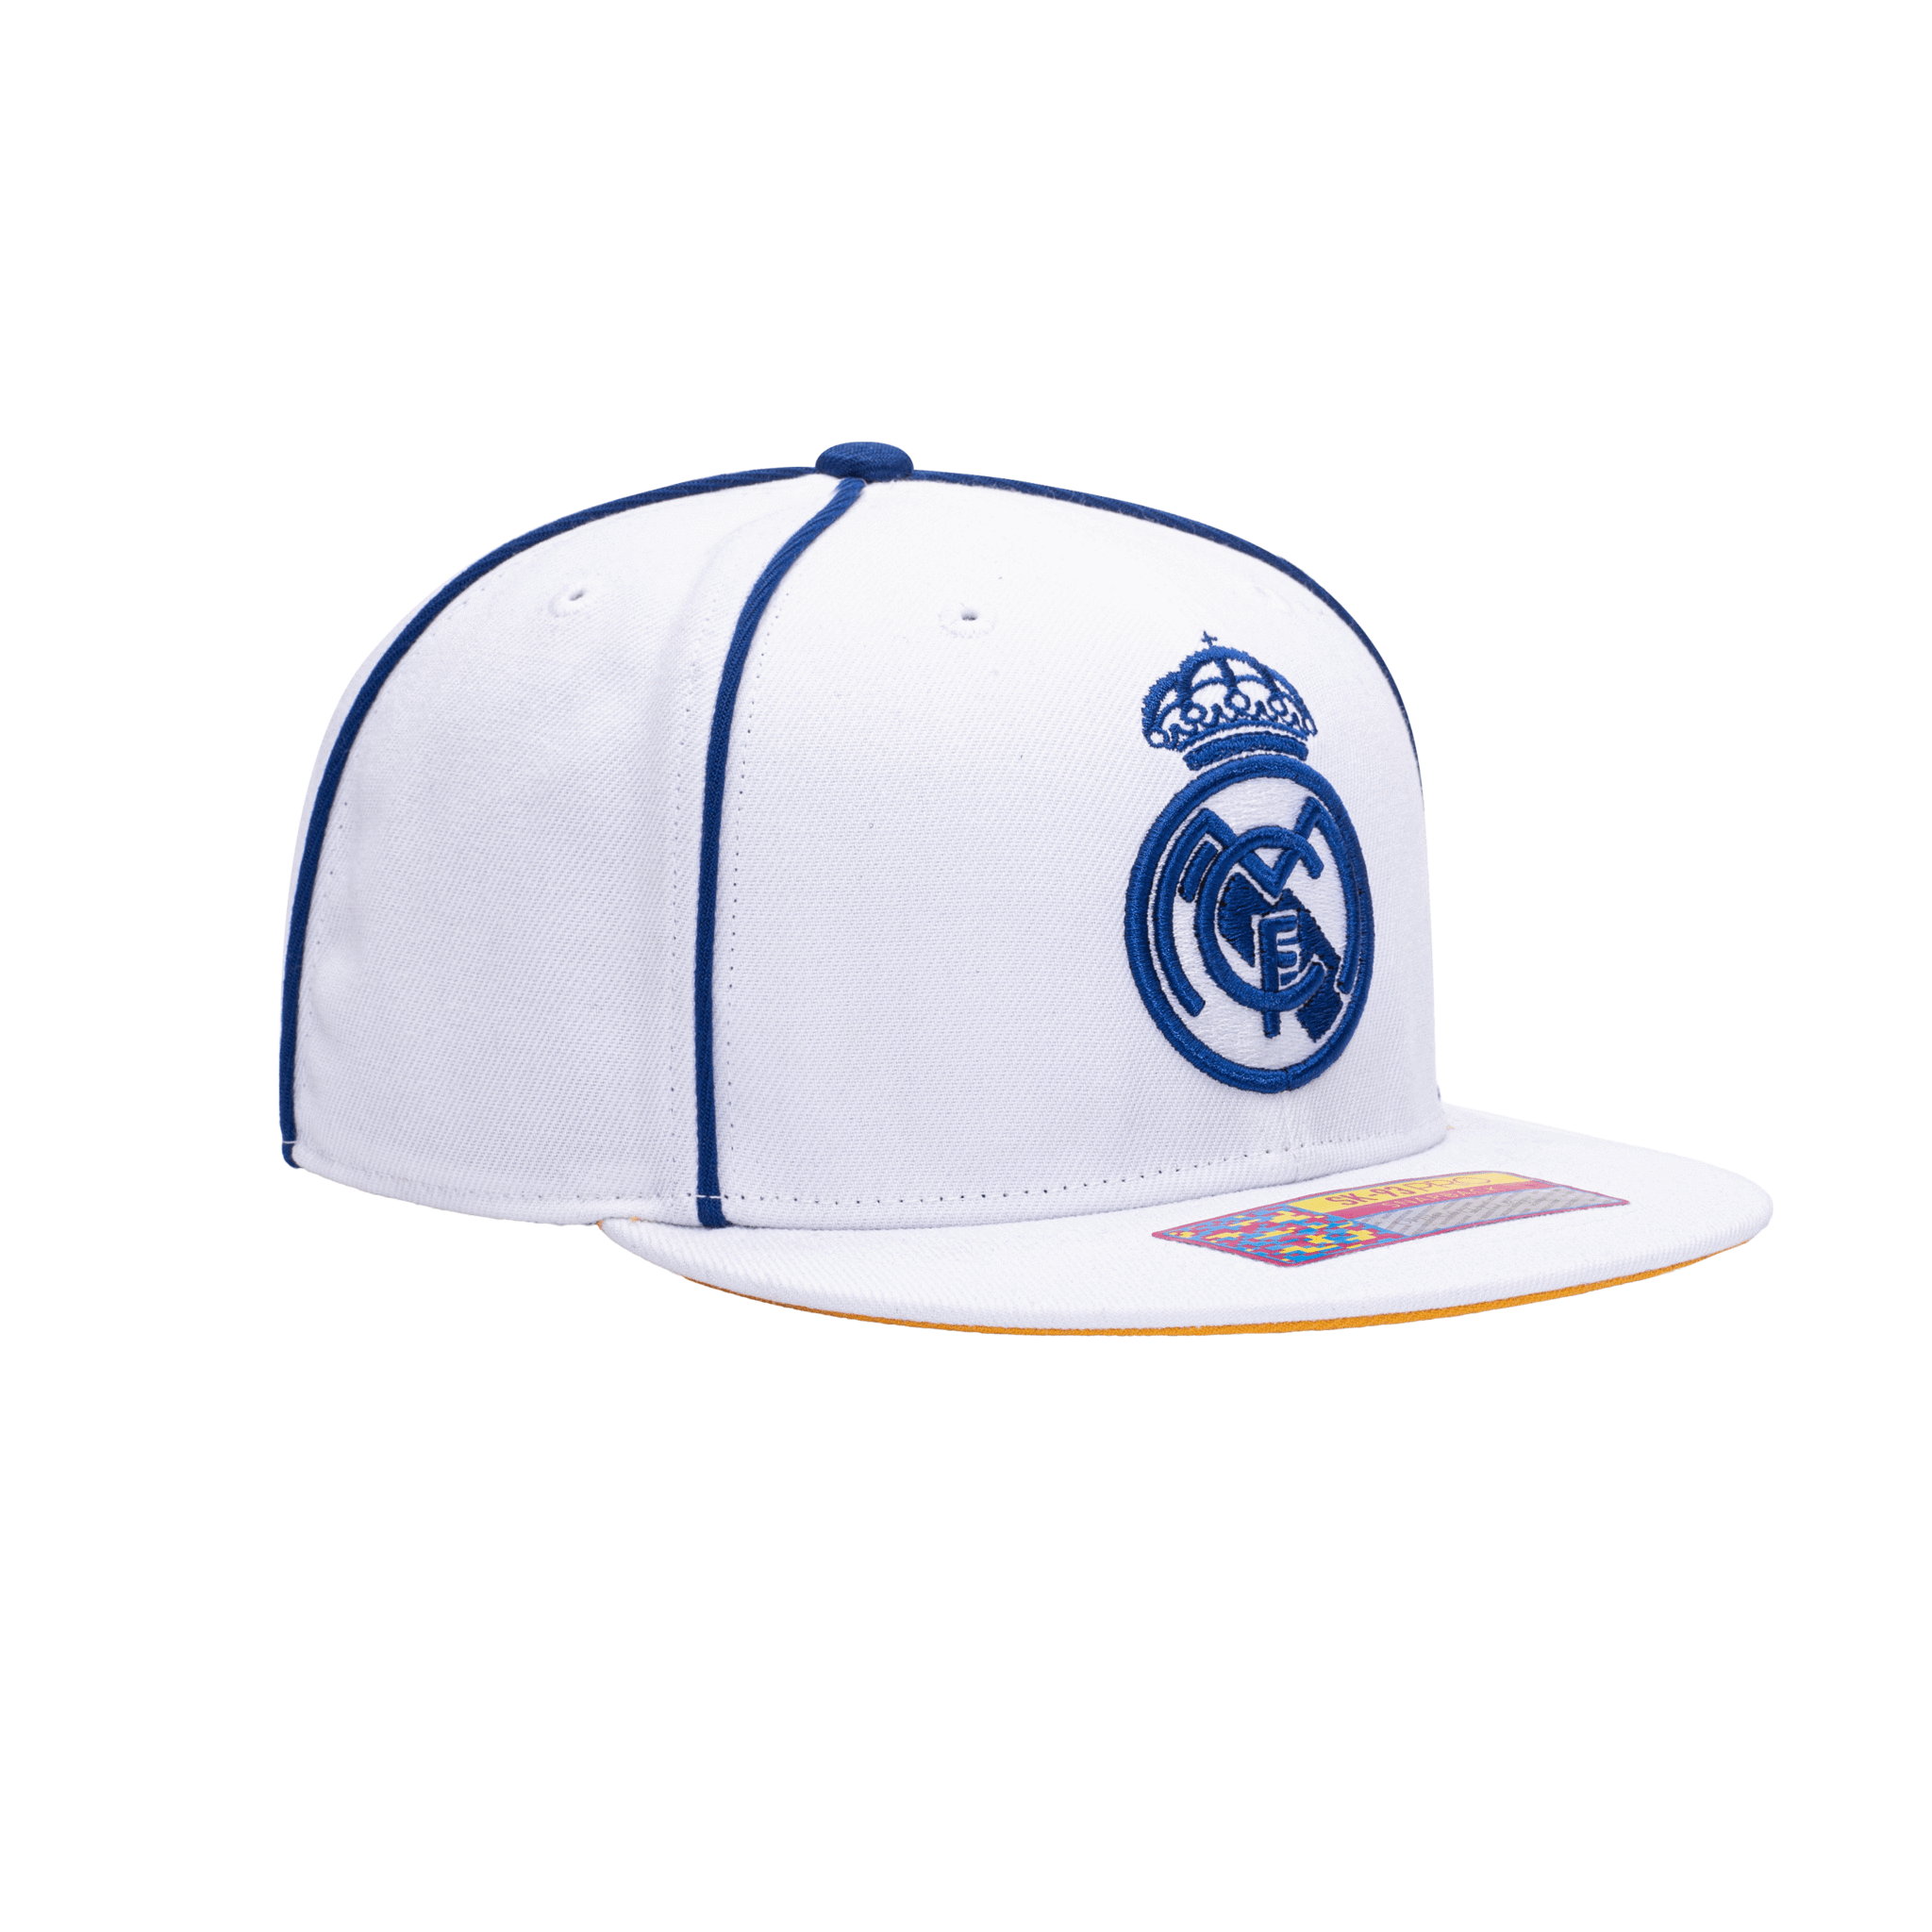 FI COLLECTIONS REAL MADRID CALI NIGHT SNAPBACK HAT